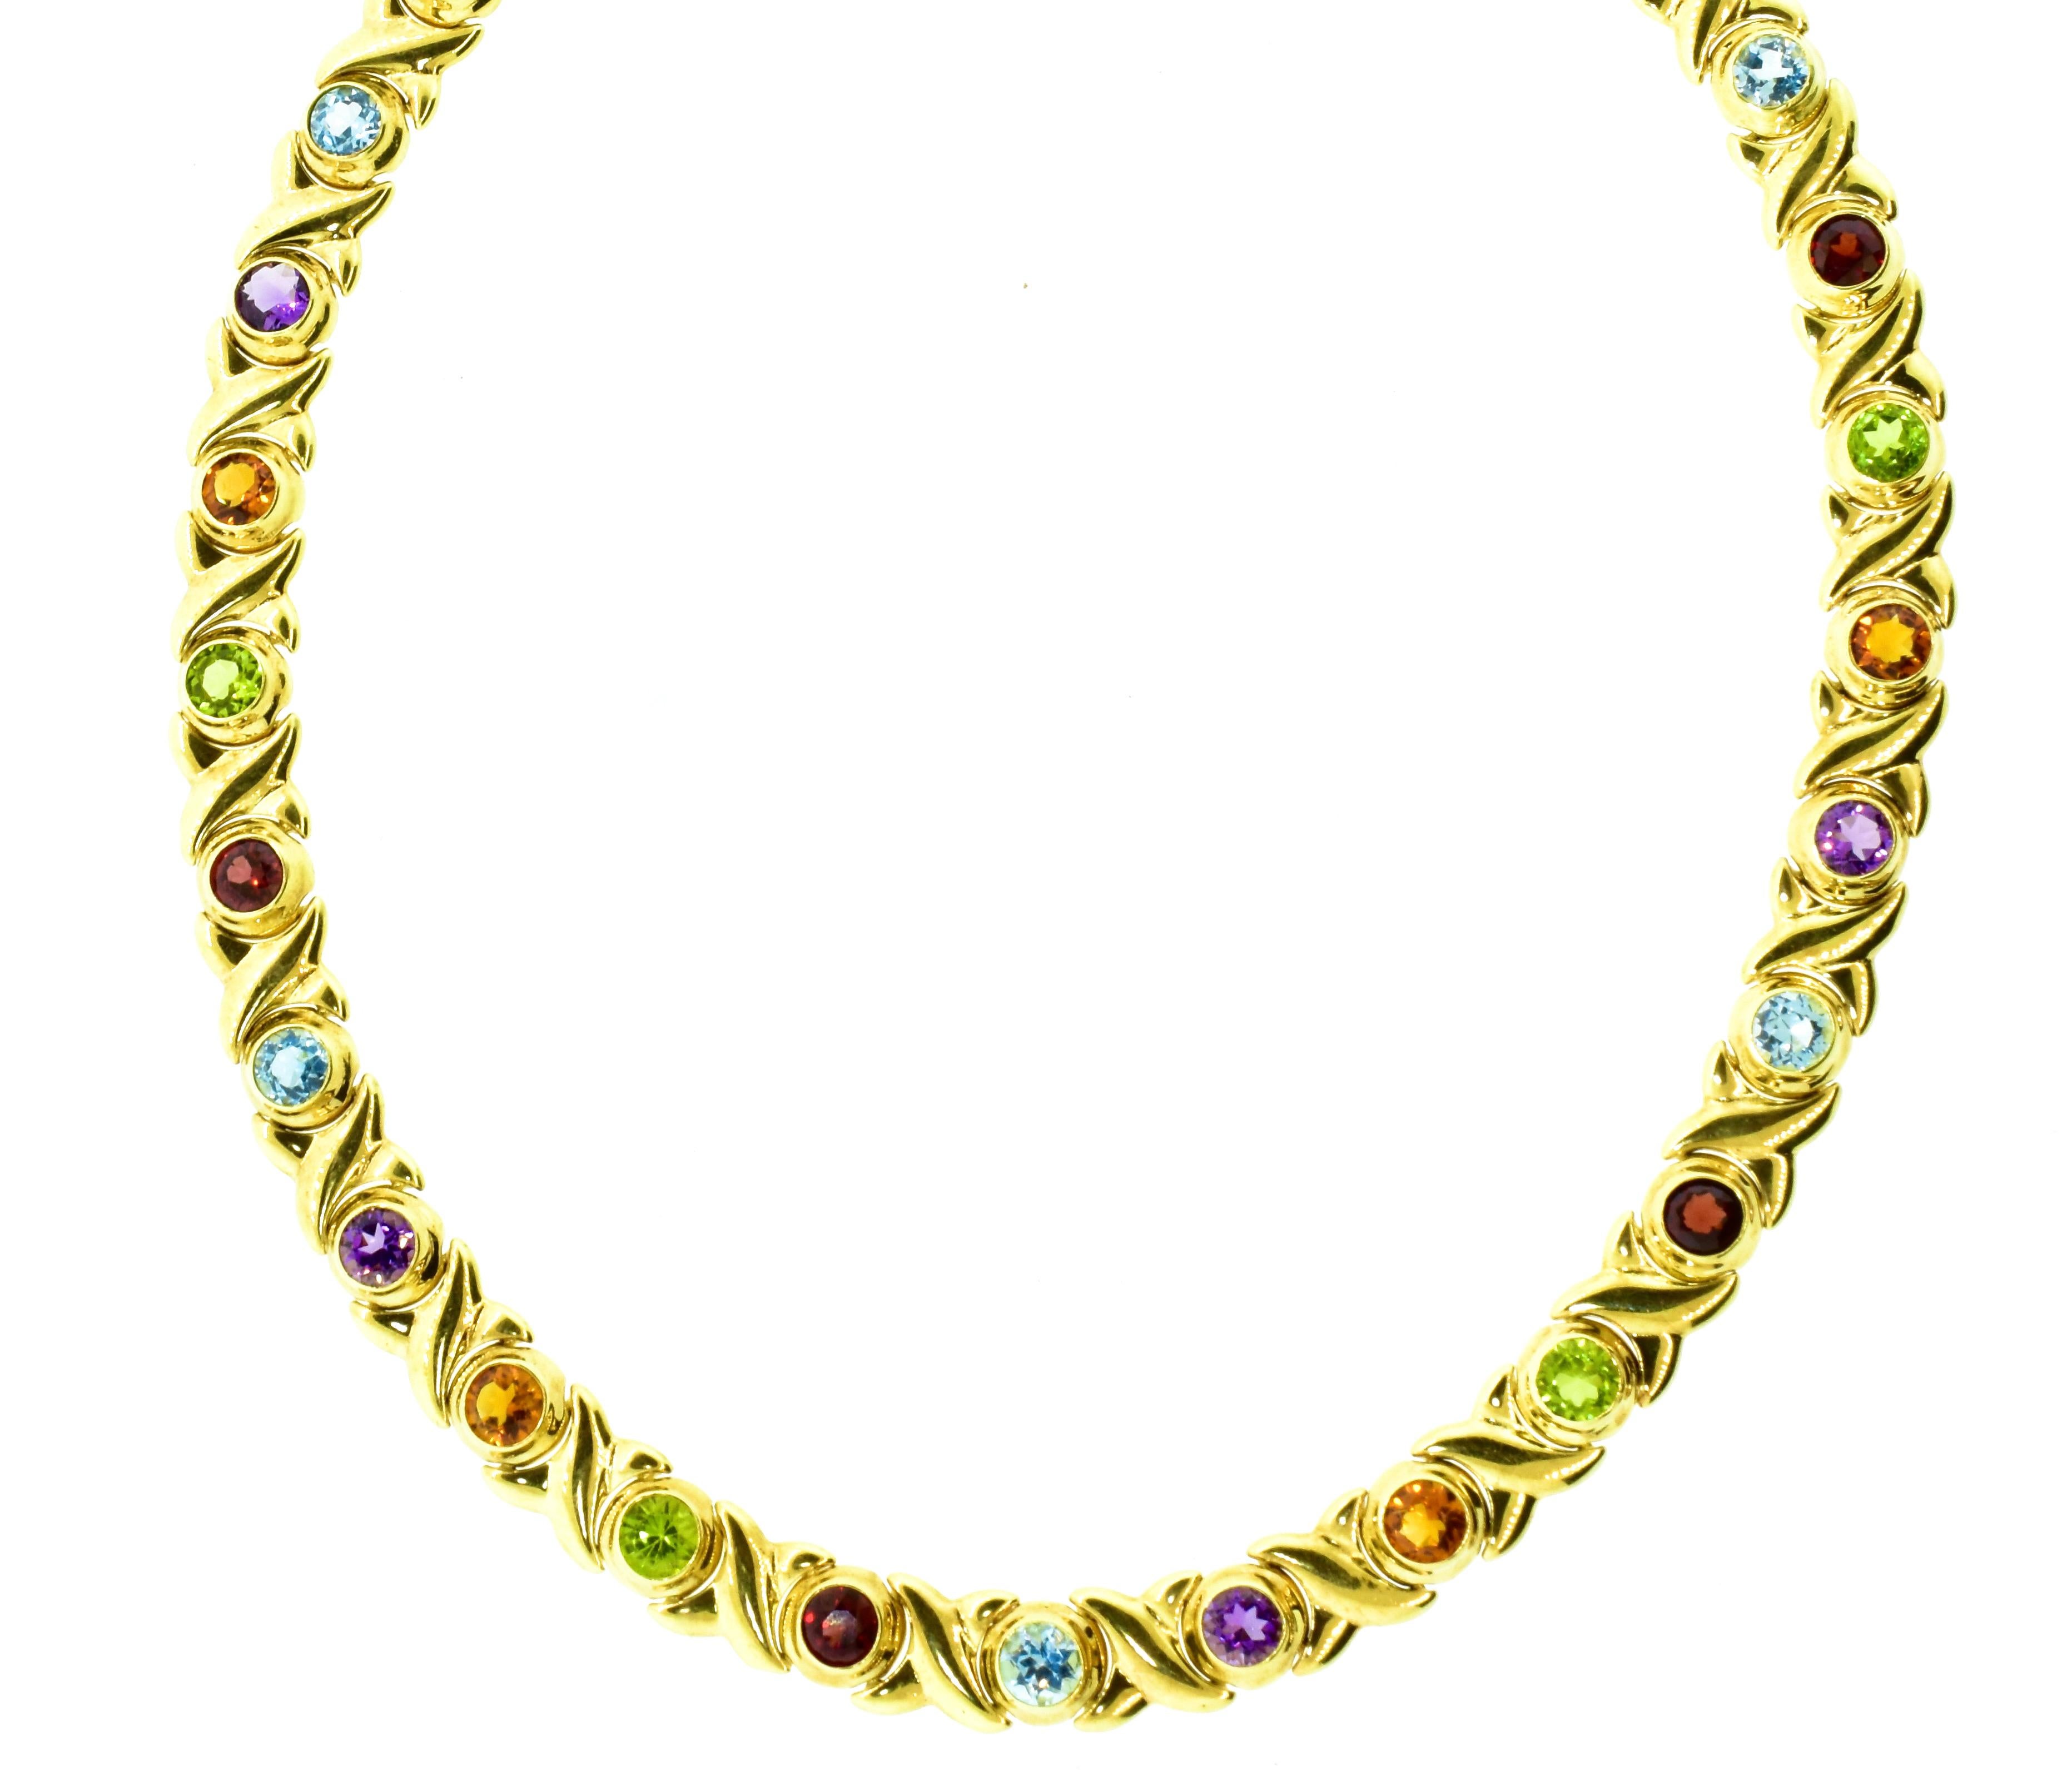 Gem Set Yellow Gold Vintage Necklace with Peridot, Amethyst, Citrine, and Garnet In Excellent Condition For Sale In Aspen, CO